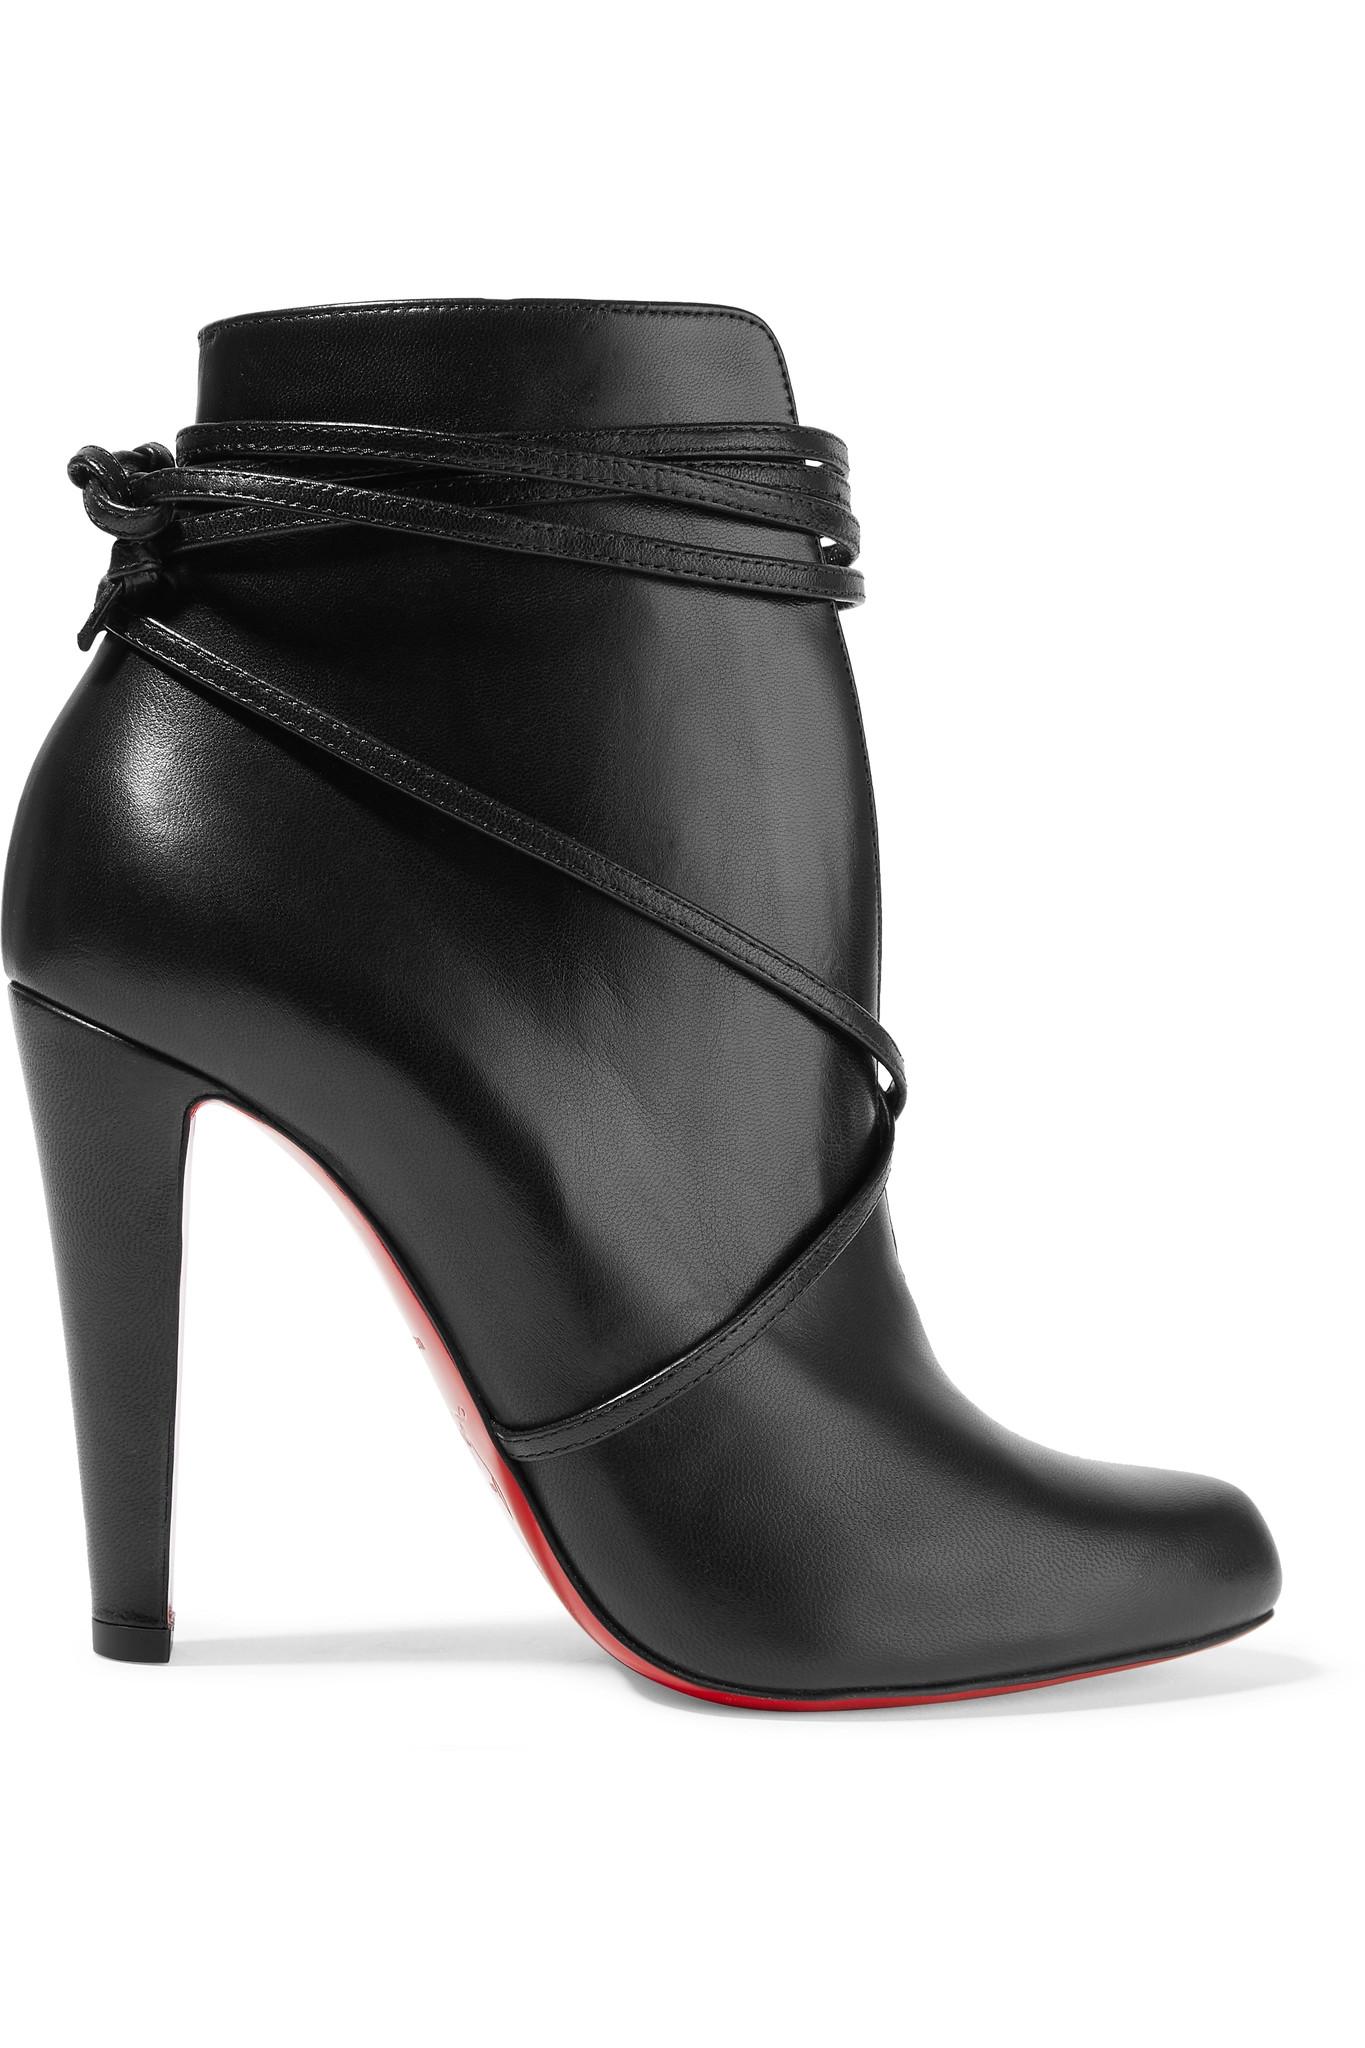 Christian louboutin S.i.t. Rain 100 Leather Ankle Boots in Black | Lyst